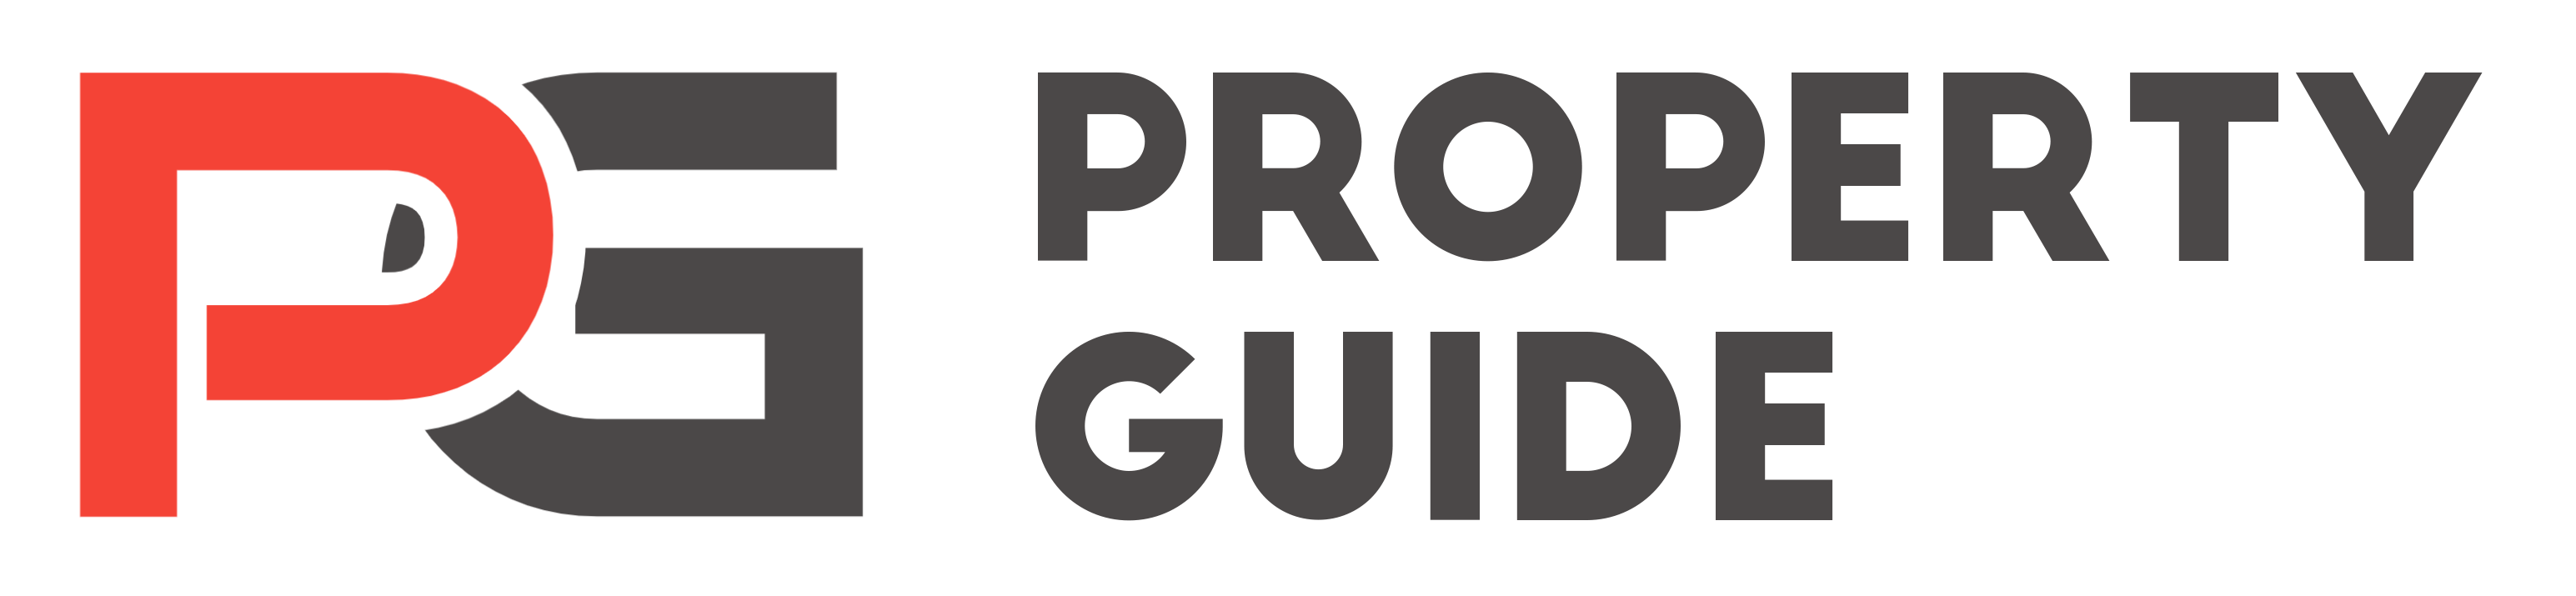 propertyguide.co.in